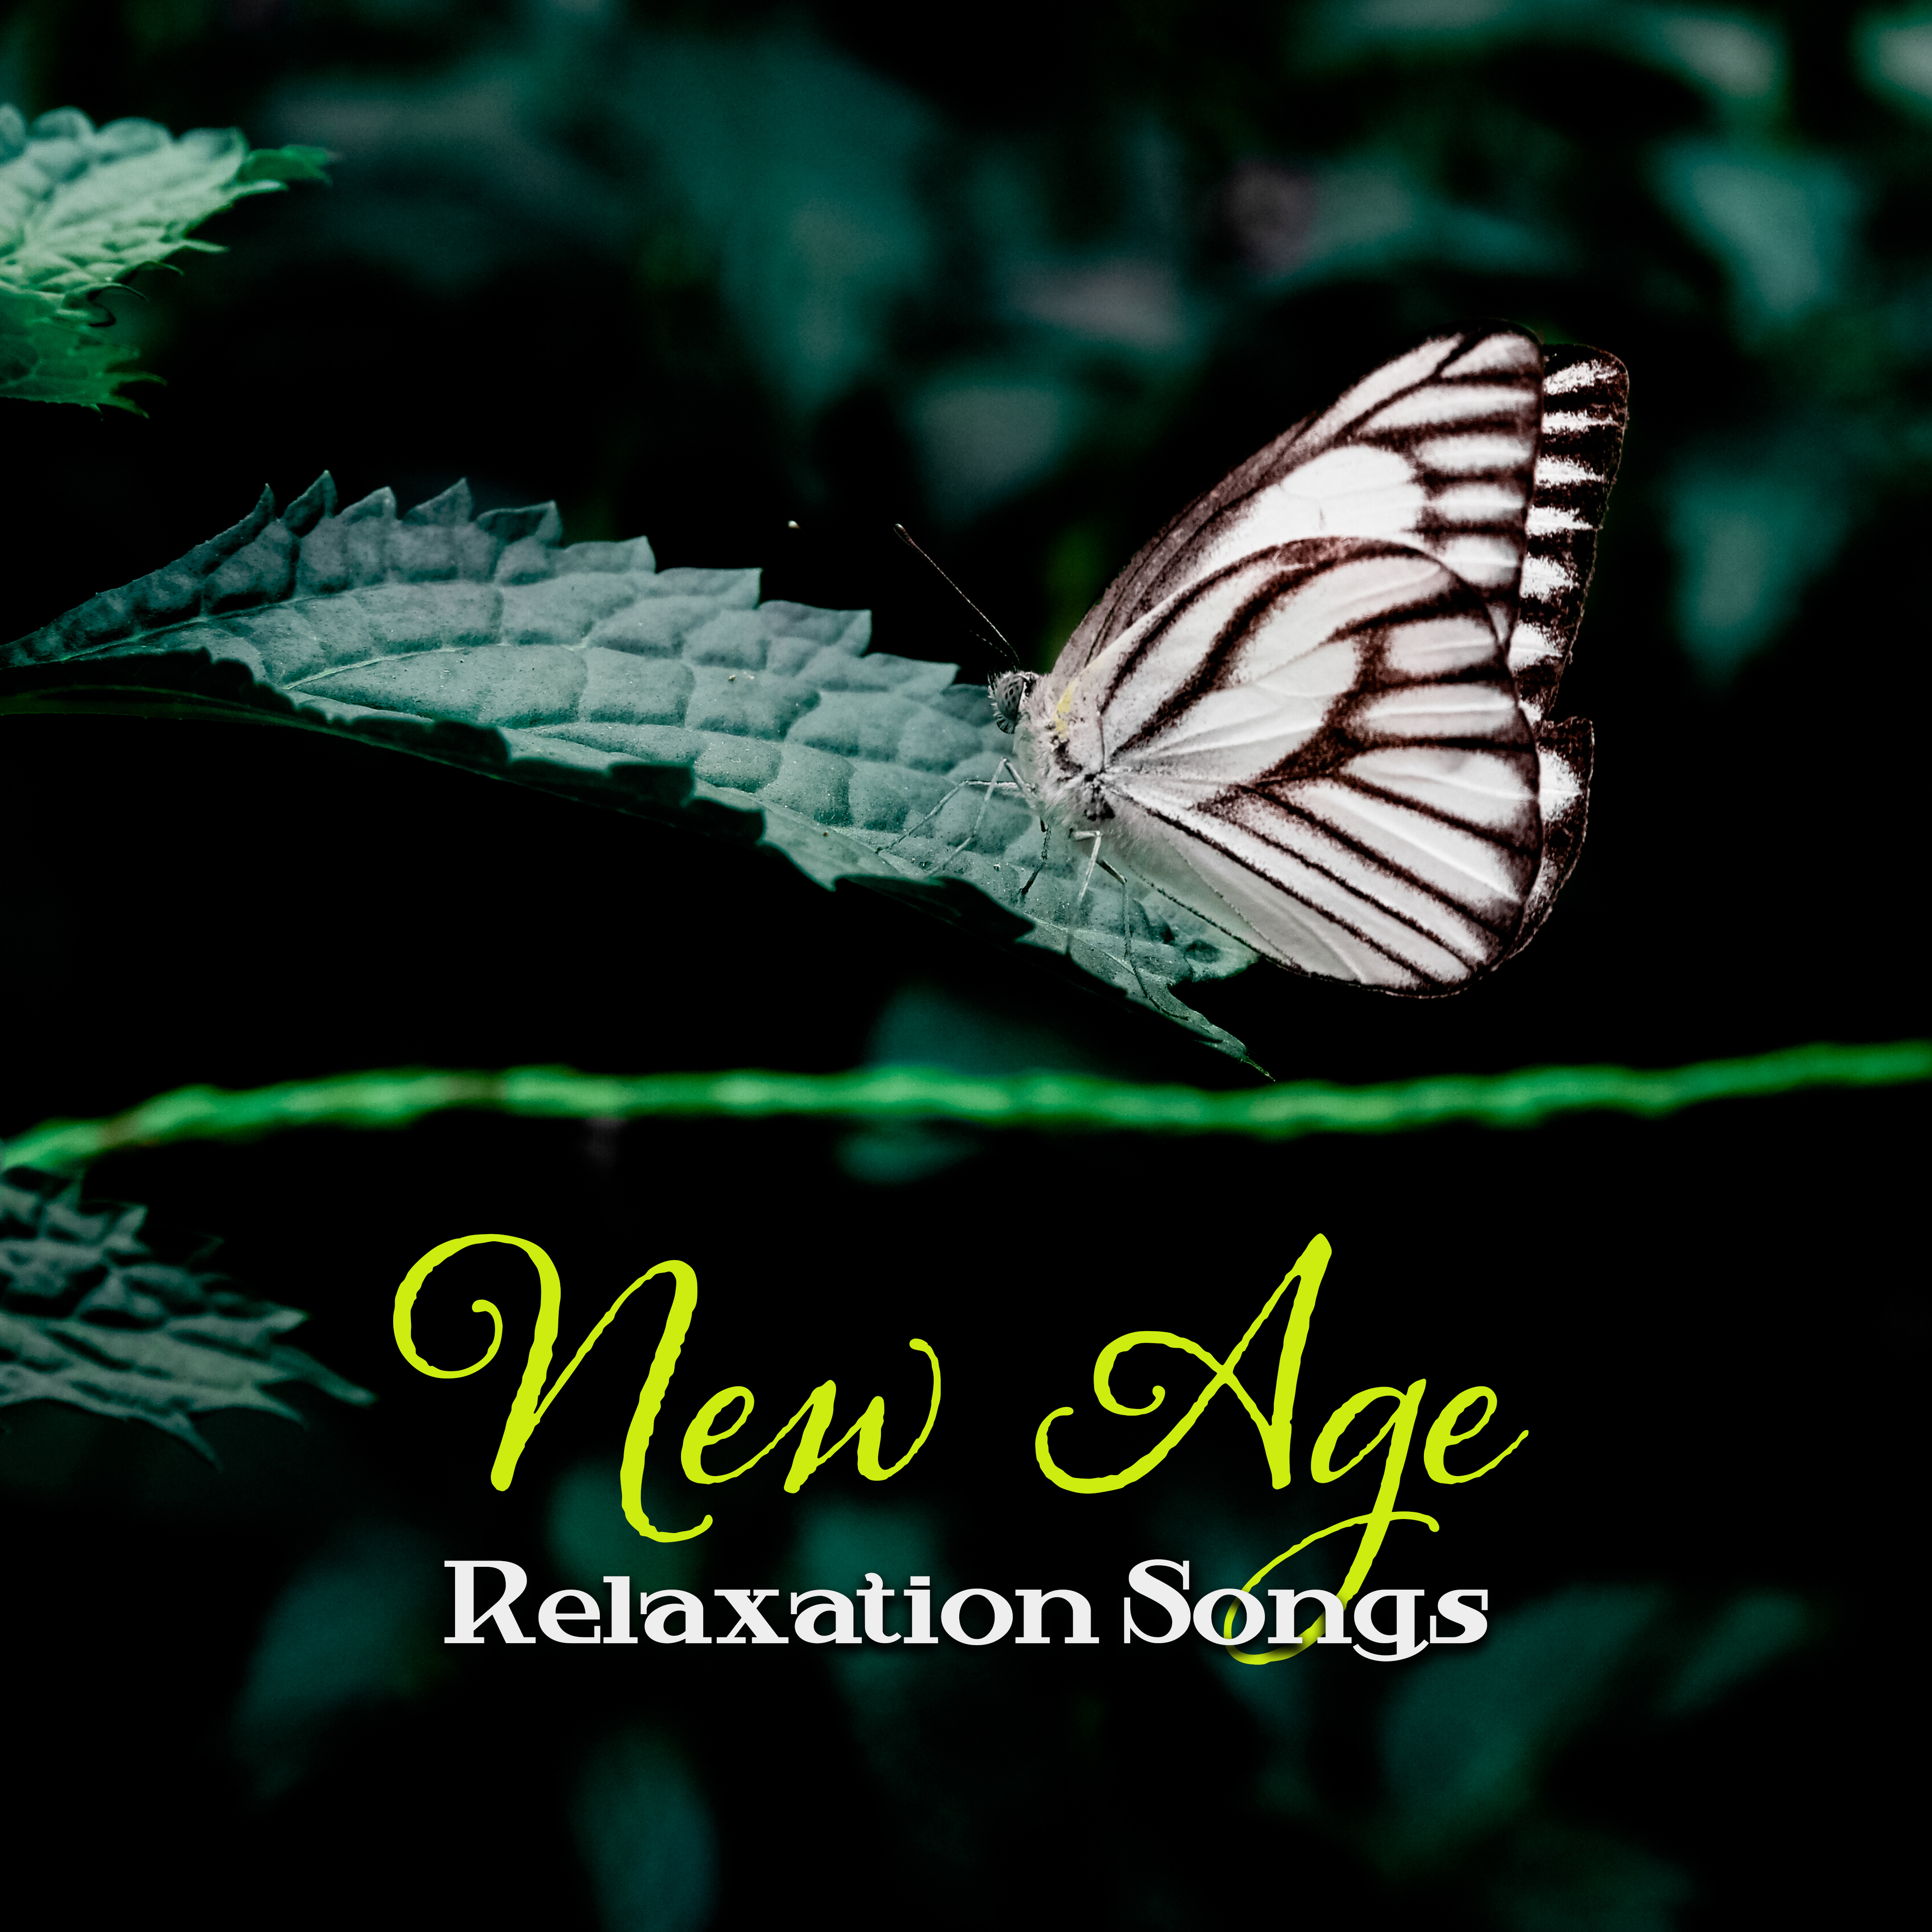 New Age Relaxation Songs – Relaxing New Age Songs, Peaceful Music to Rest, Time for You, Chilled Melodies for Your Mind & Body